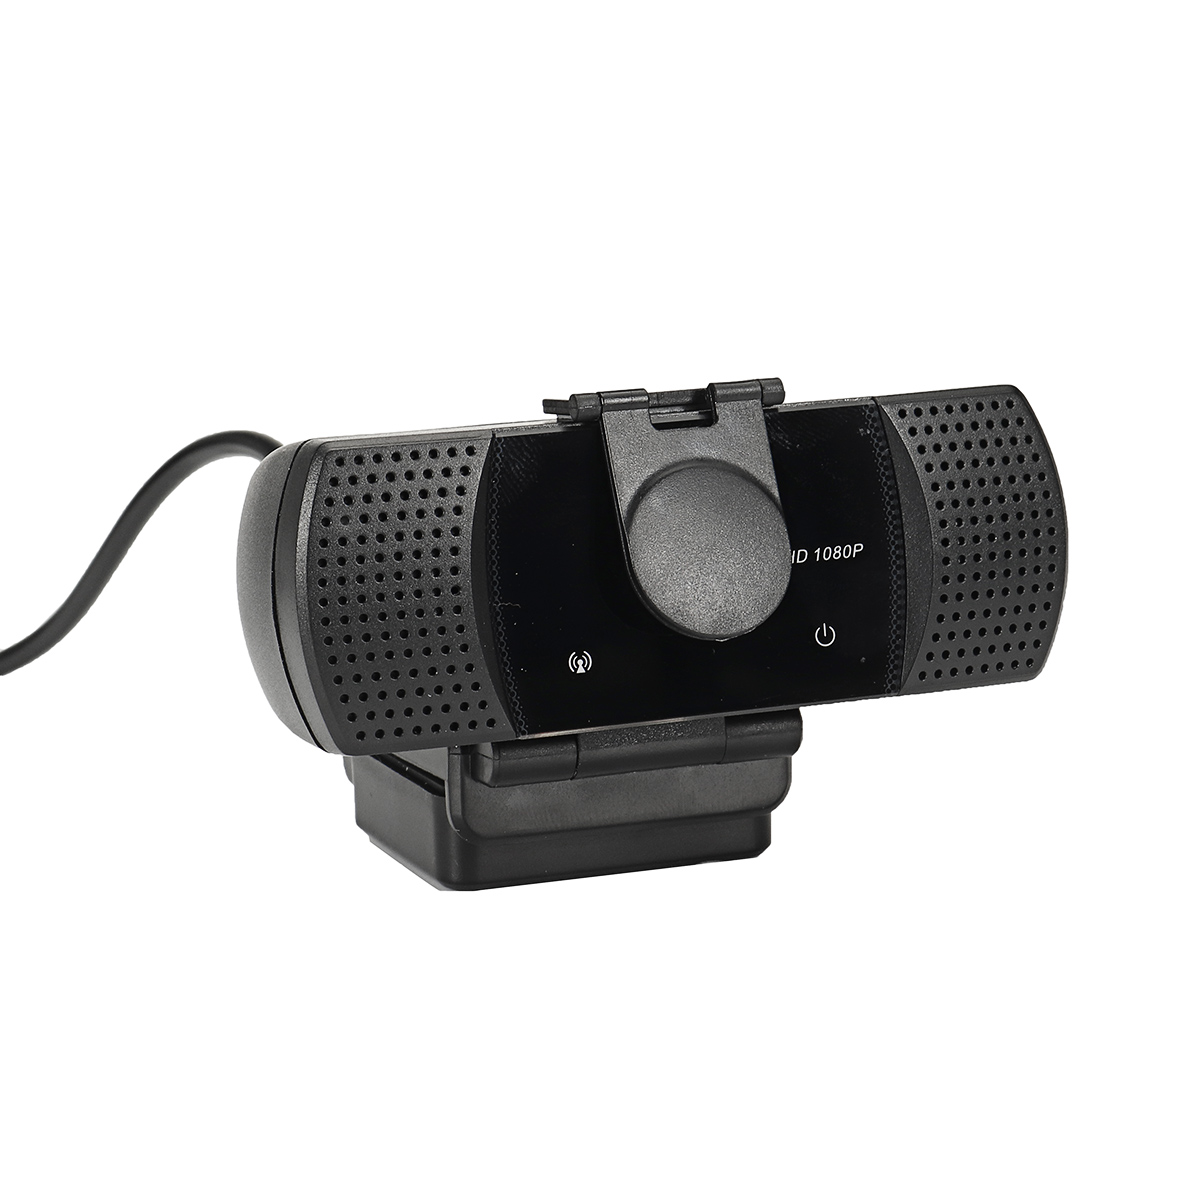 Find 1080P USB Webcams PC Laptop Video Computer Camera Built in Microphone Drive Free for Sale on Gipsybee.com with cryptocurrencies